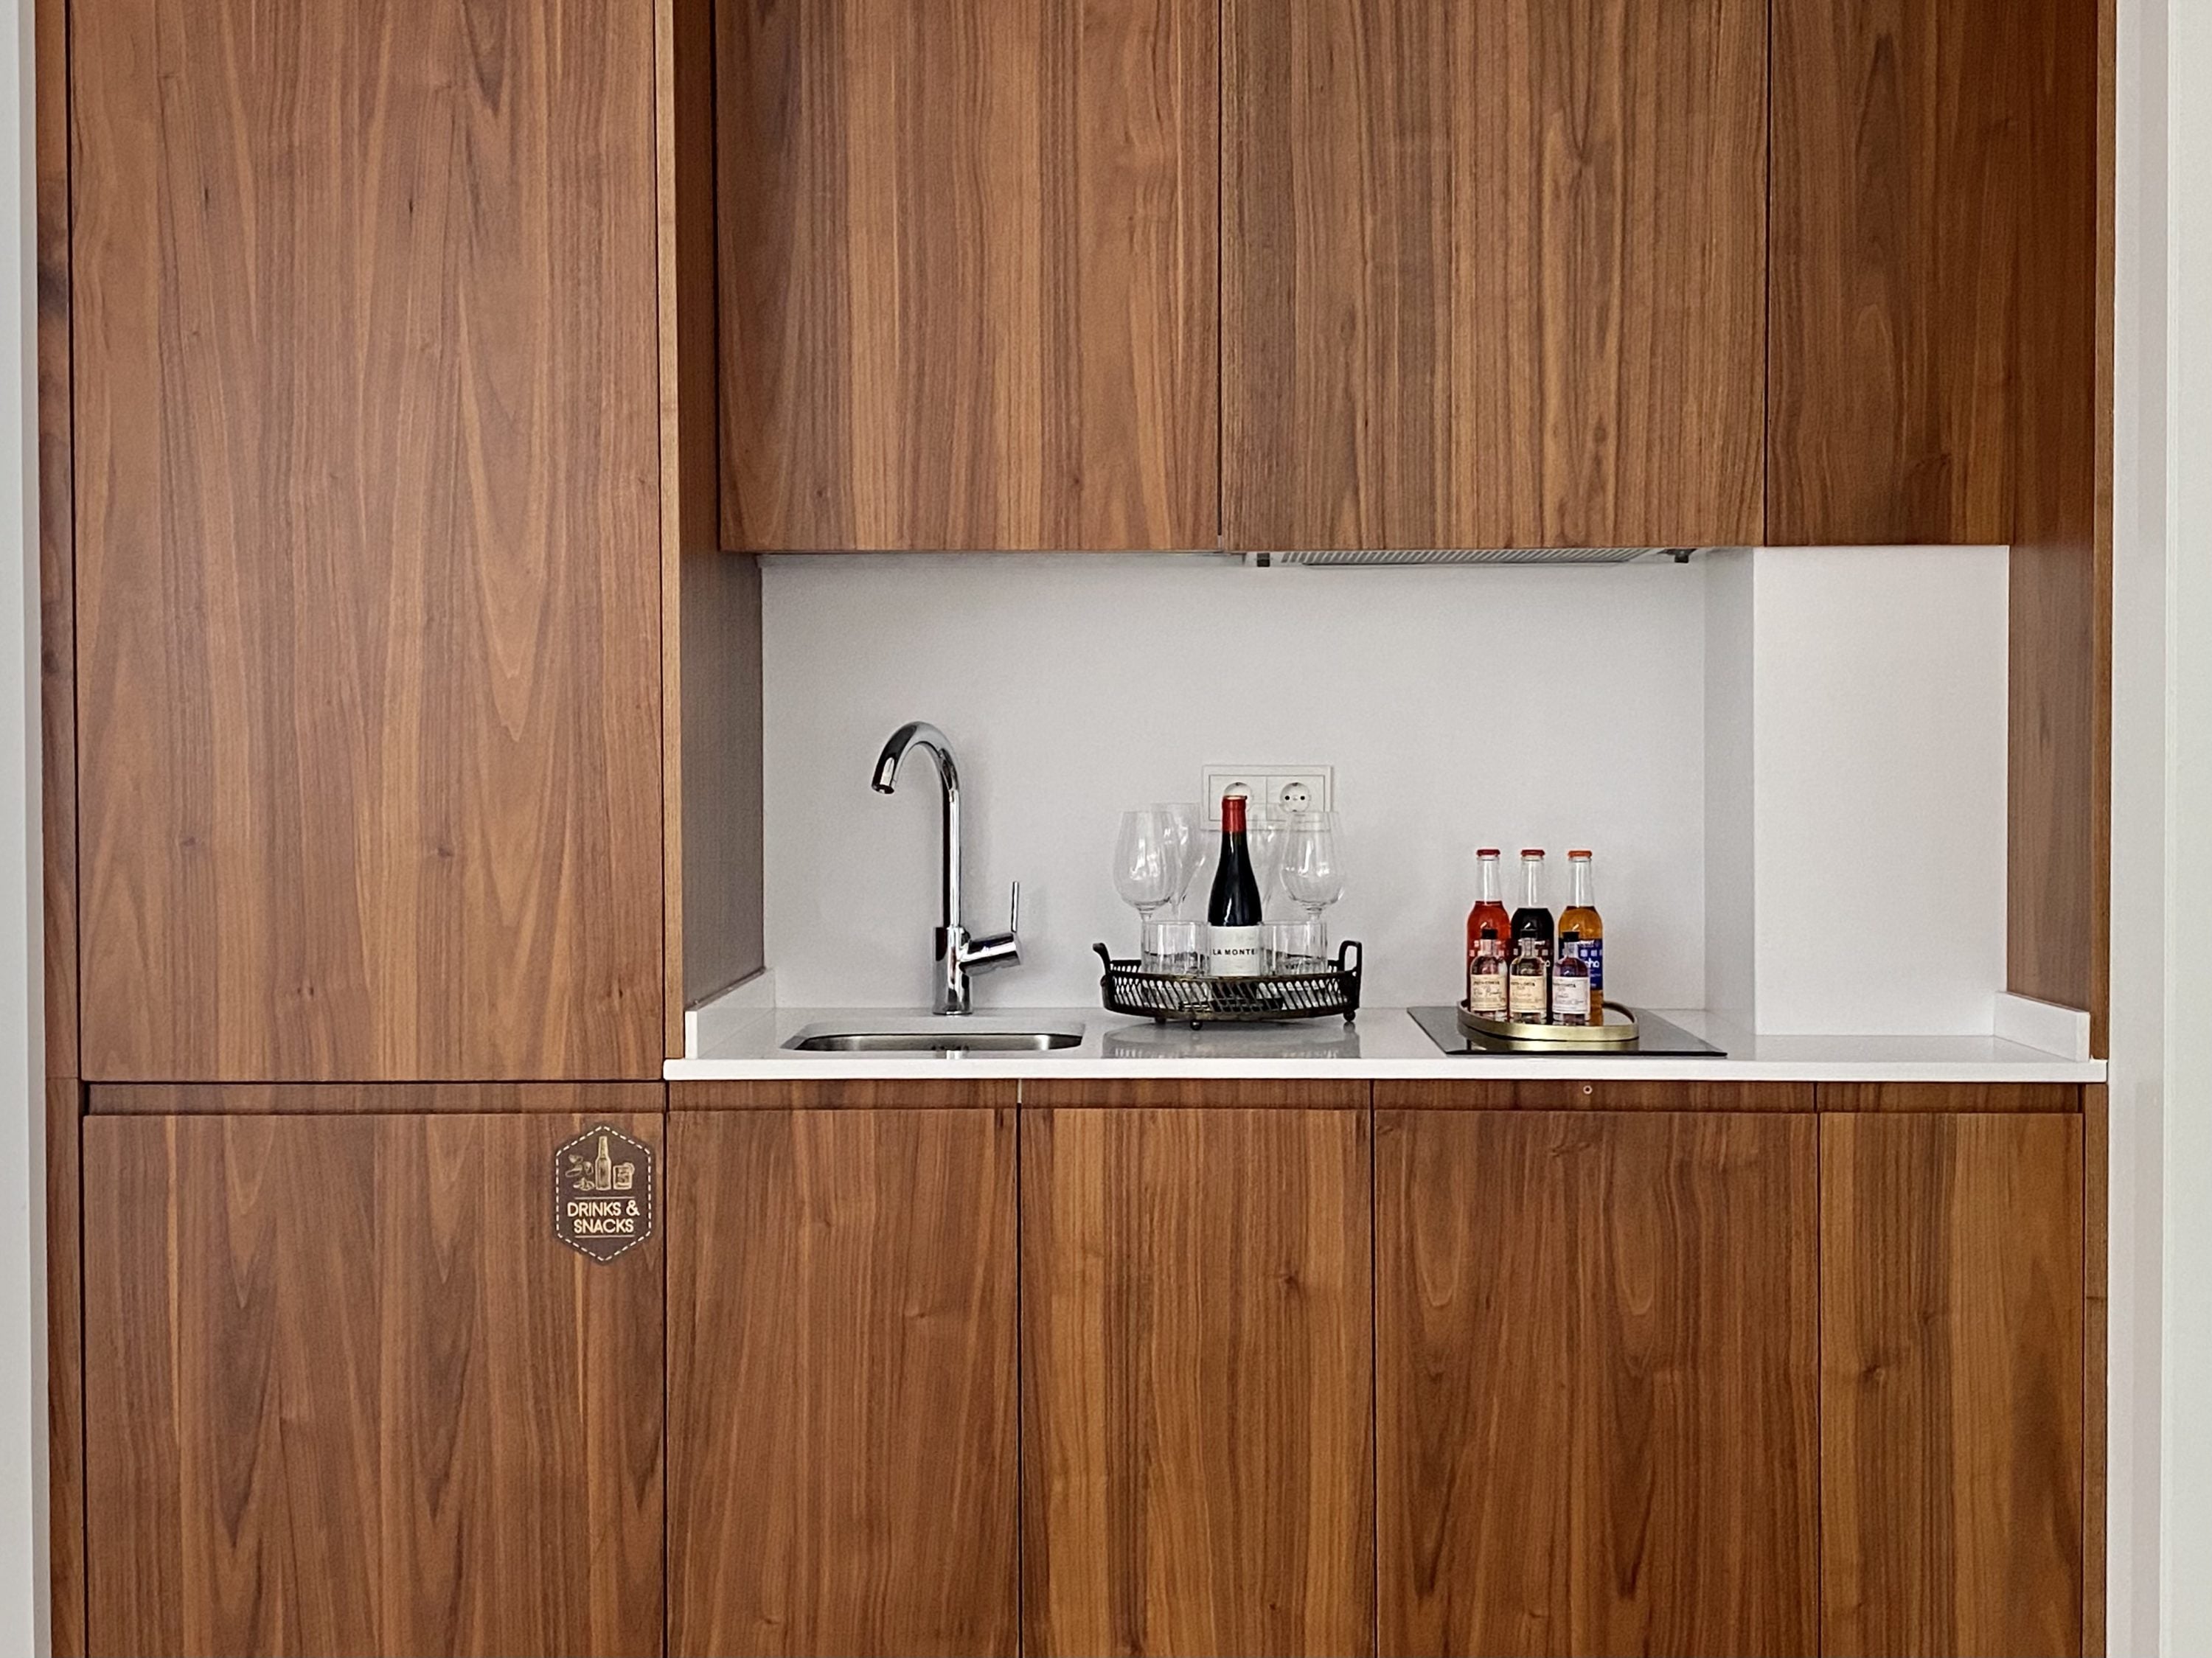 The Atocha Hotel Madrid Tapestry Collection by Hilton El Atochal Penthouse small kitchenette